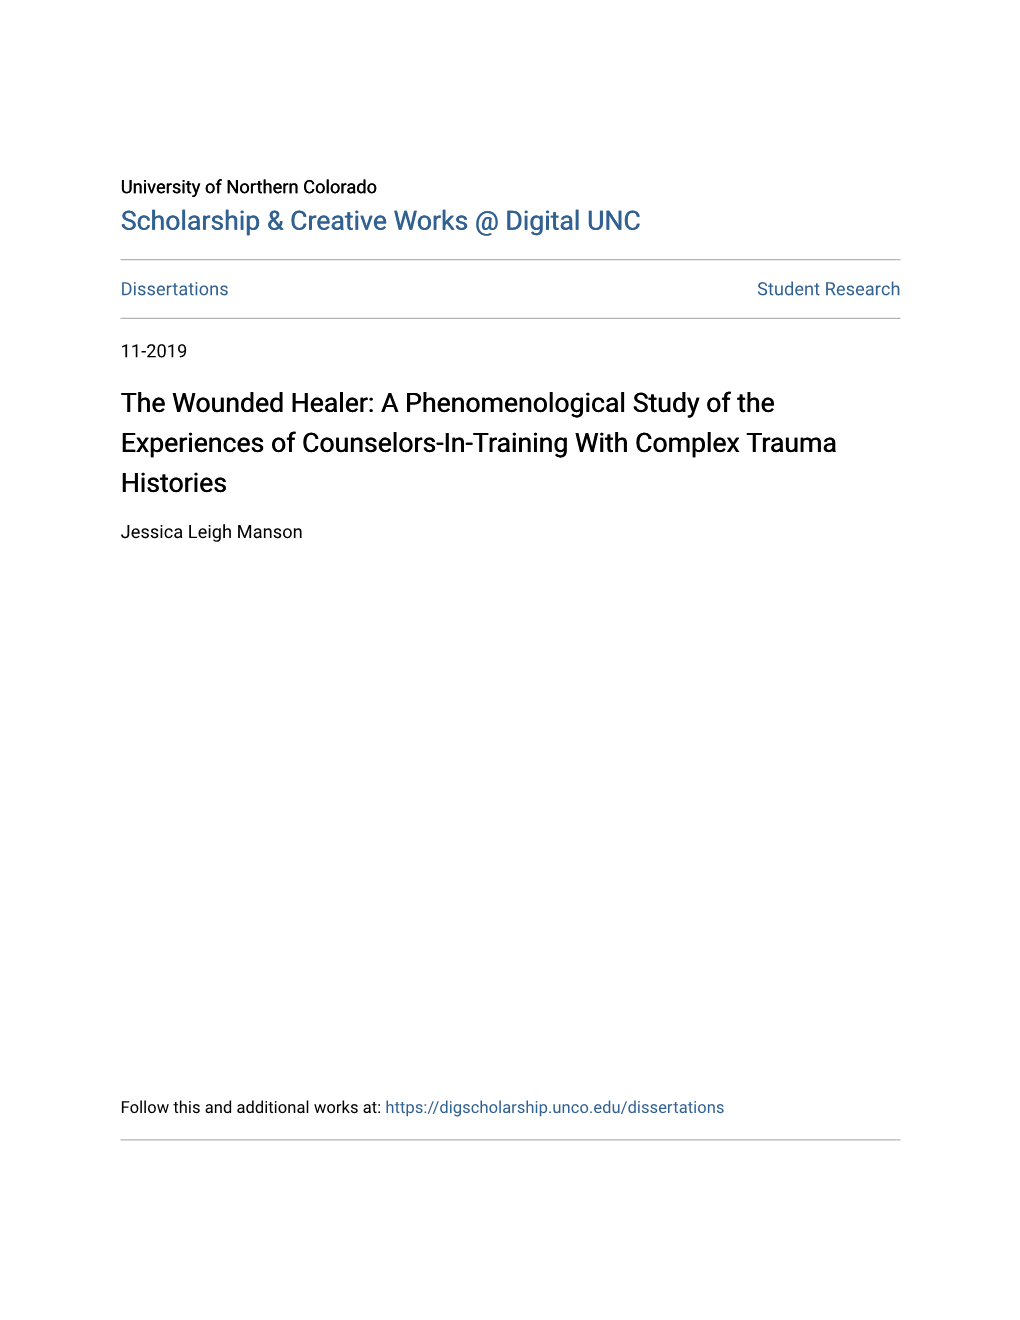 The Wounded Healer: a Phenomenological Study of the Experiences of Counselors-In-Training with Complex Trauma Histories